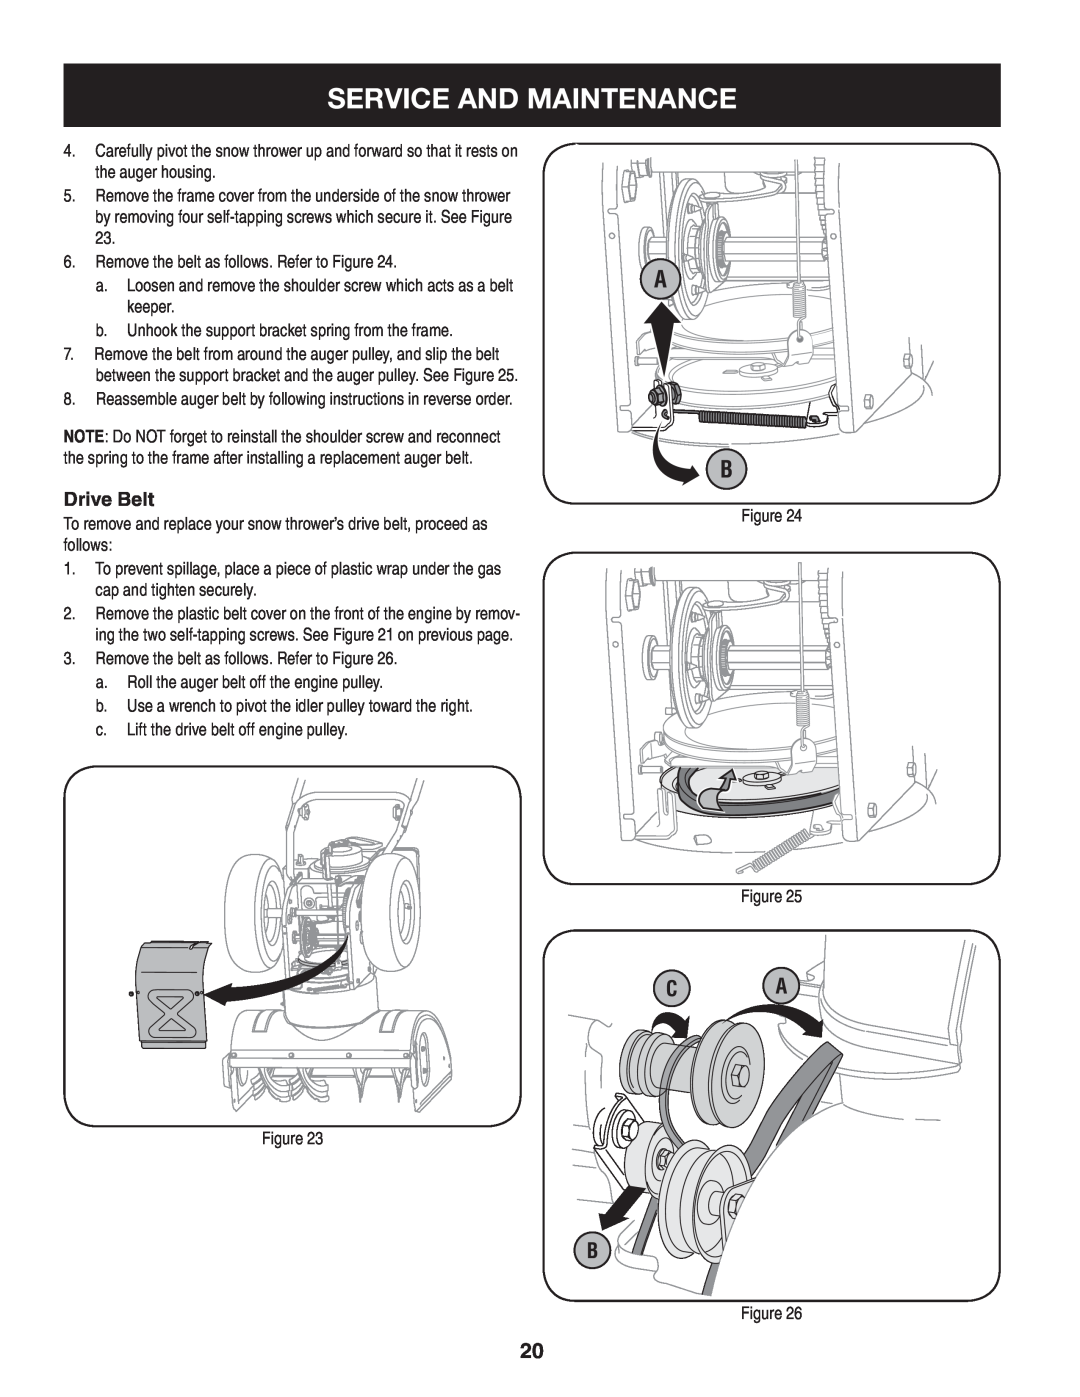 Sears 247.8879 operating instructions Service And Maintenance, Drive Belt 